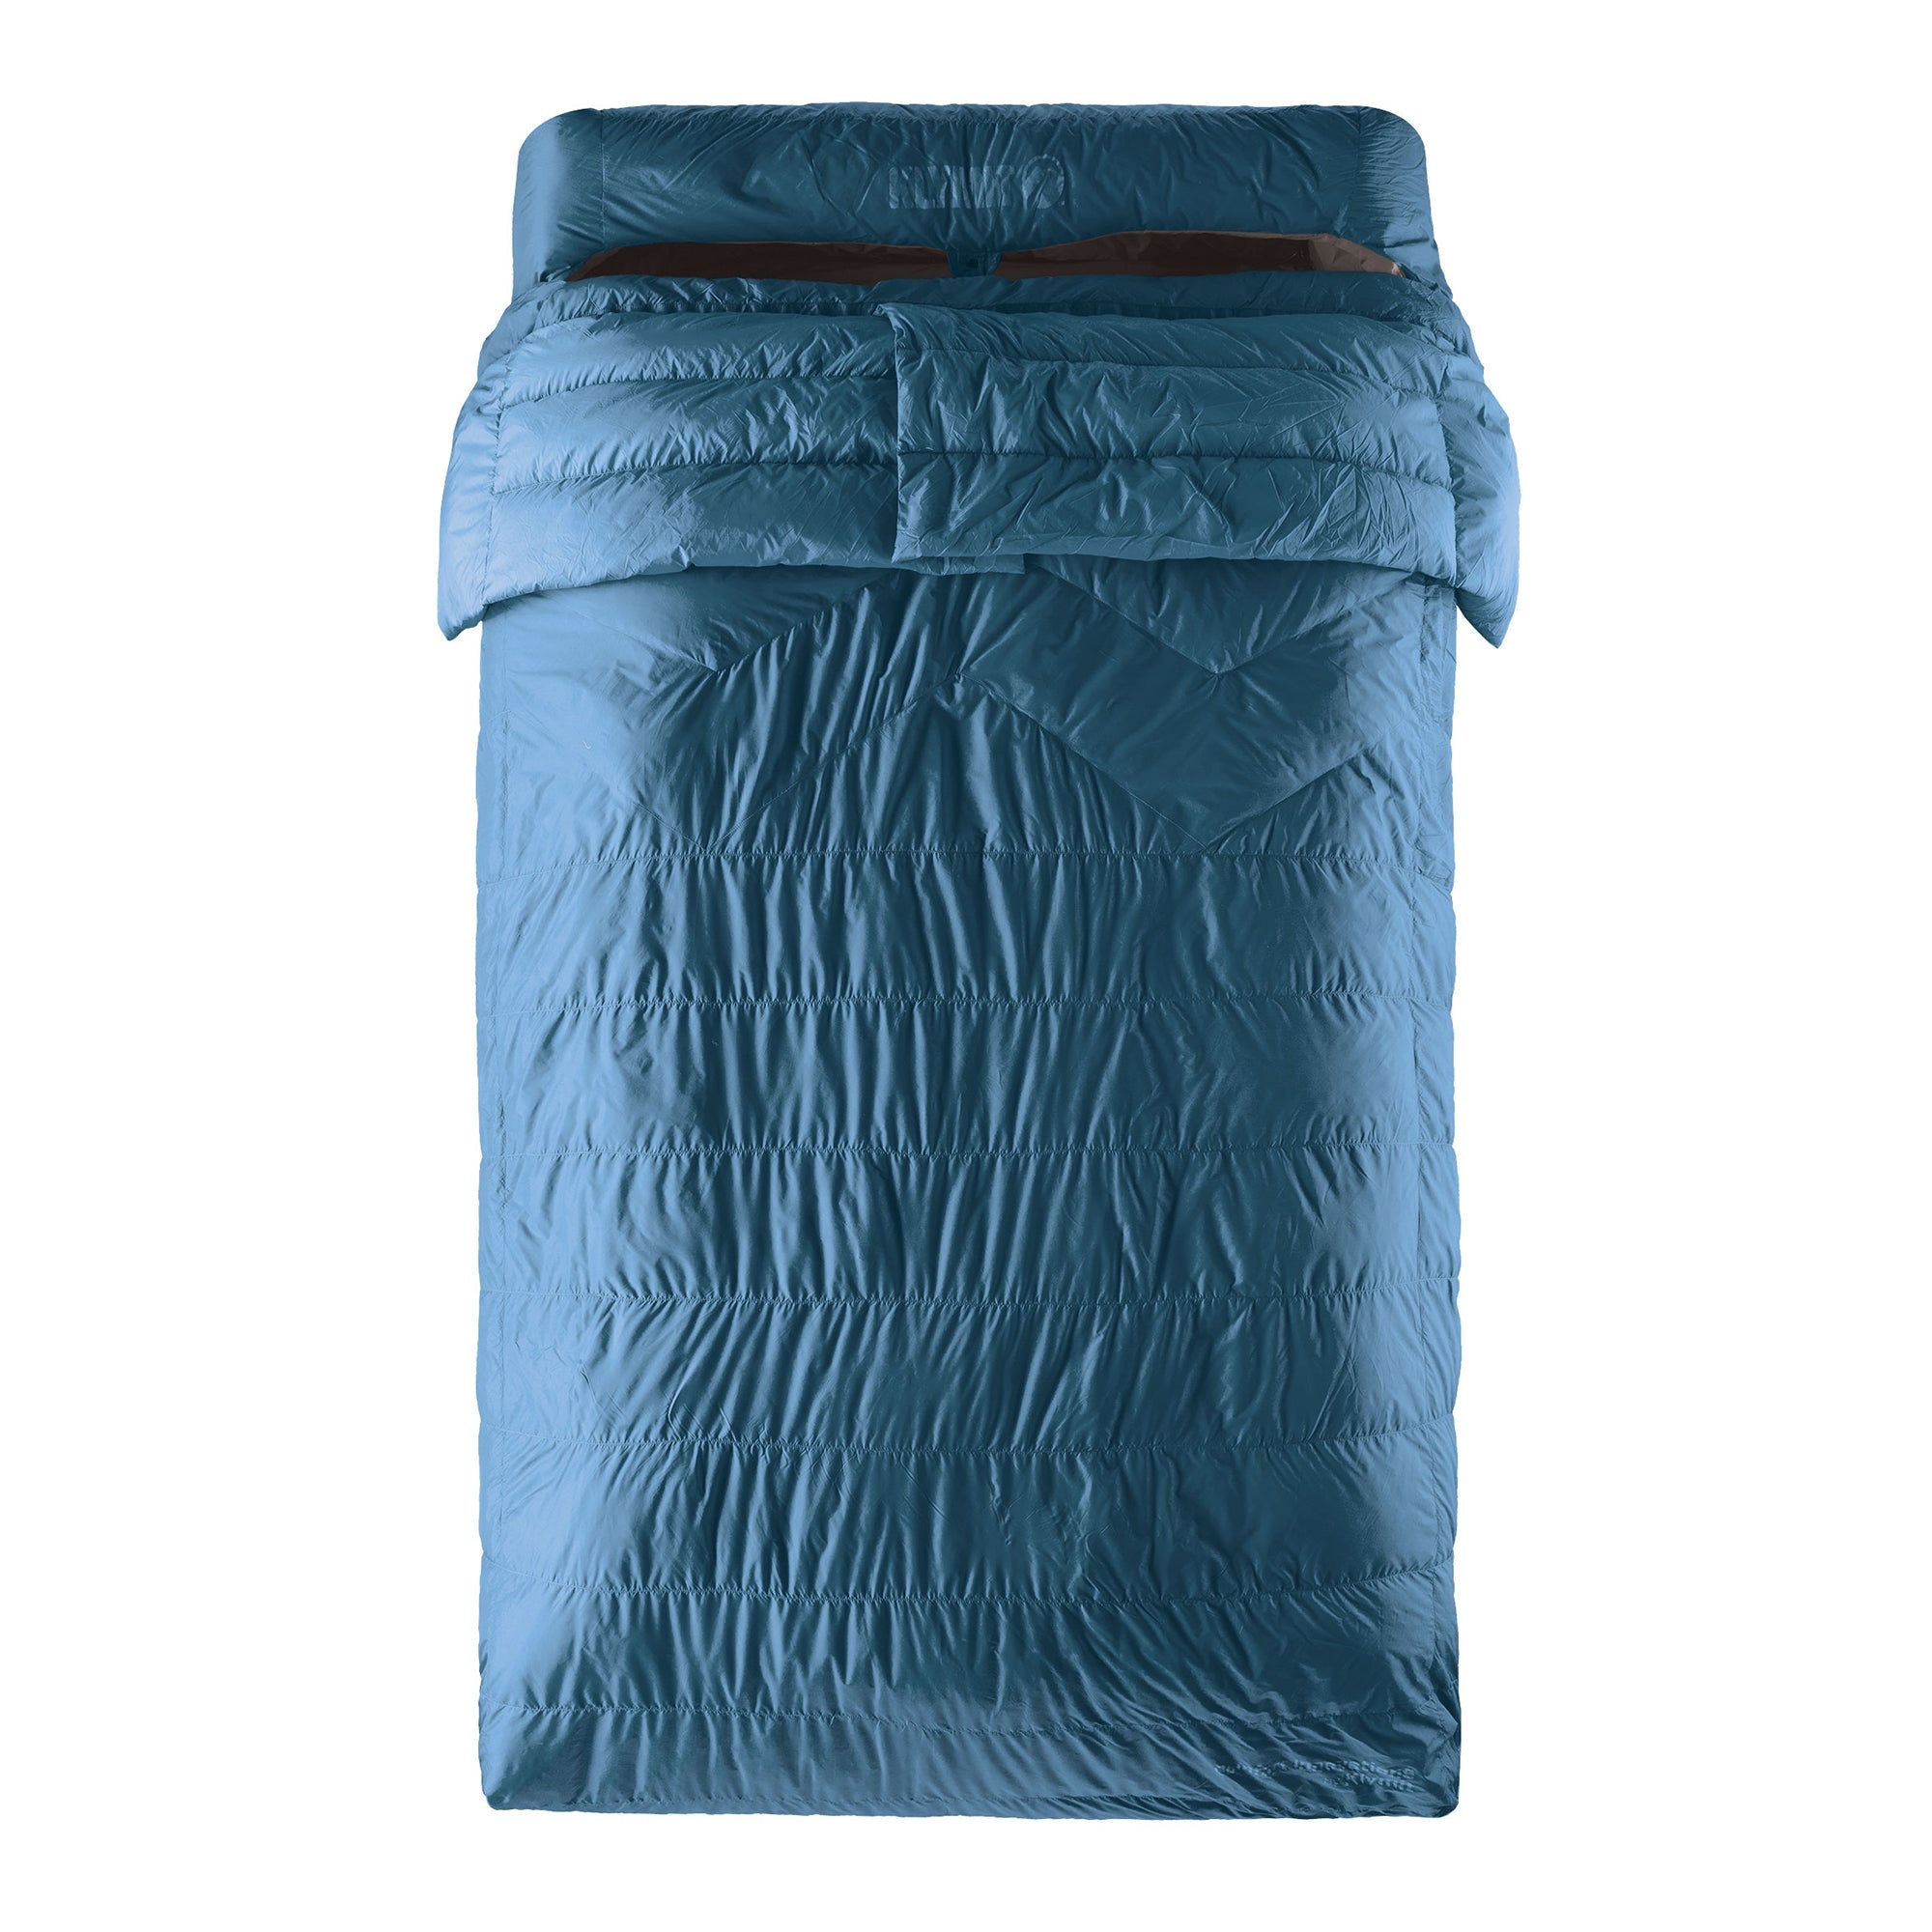 30 Degree Two Person Full-Synthetic Sleeping Bag